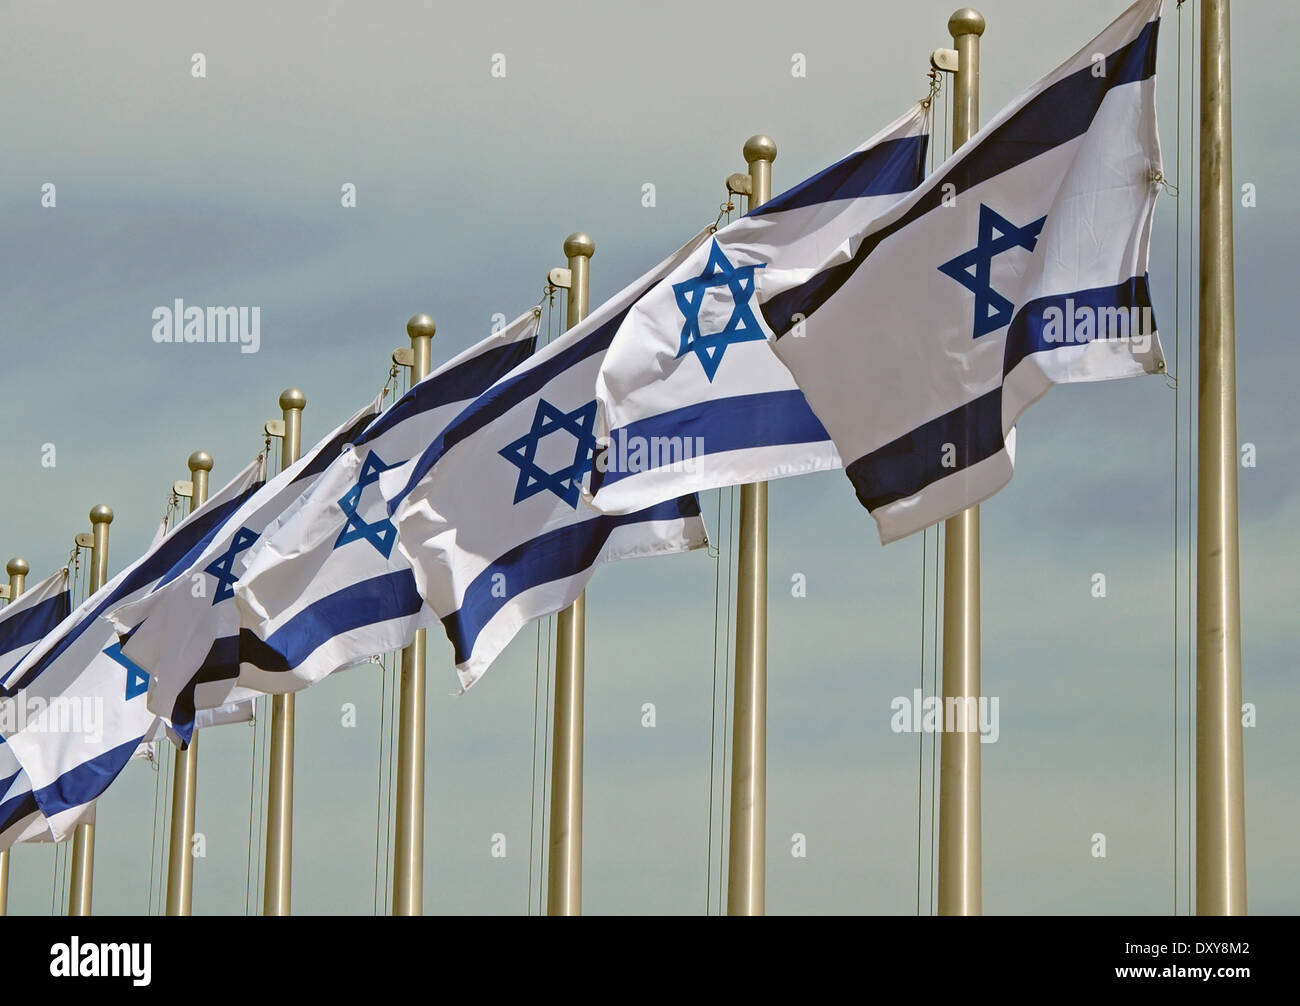 A row of Israeli flags in the Knesset Compound Stock Photo